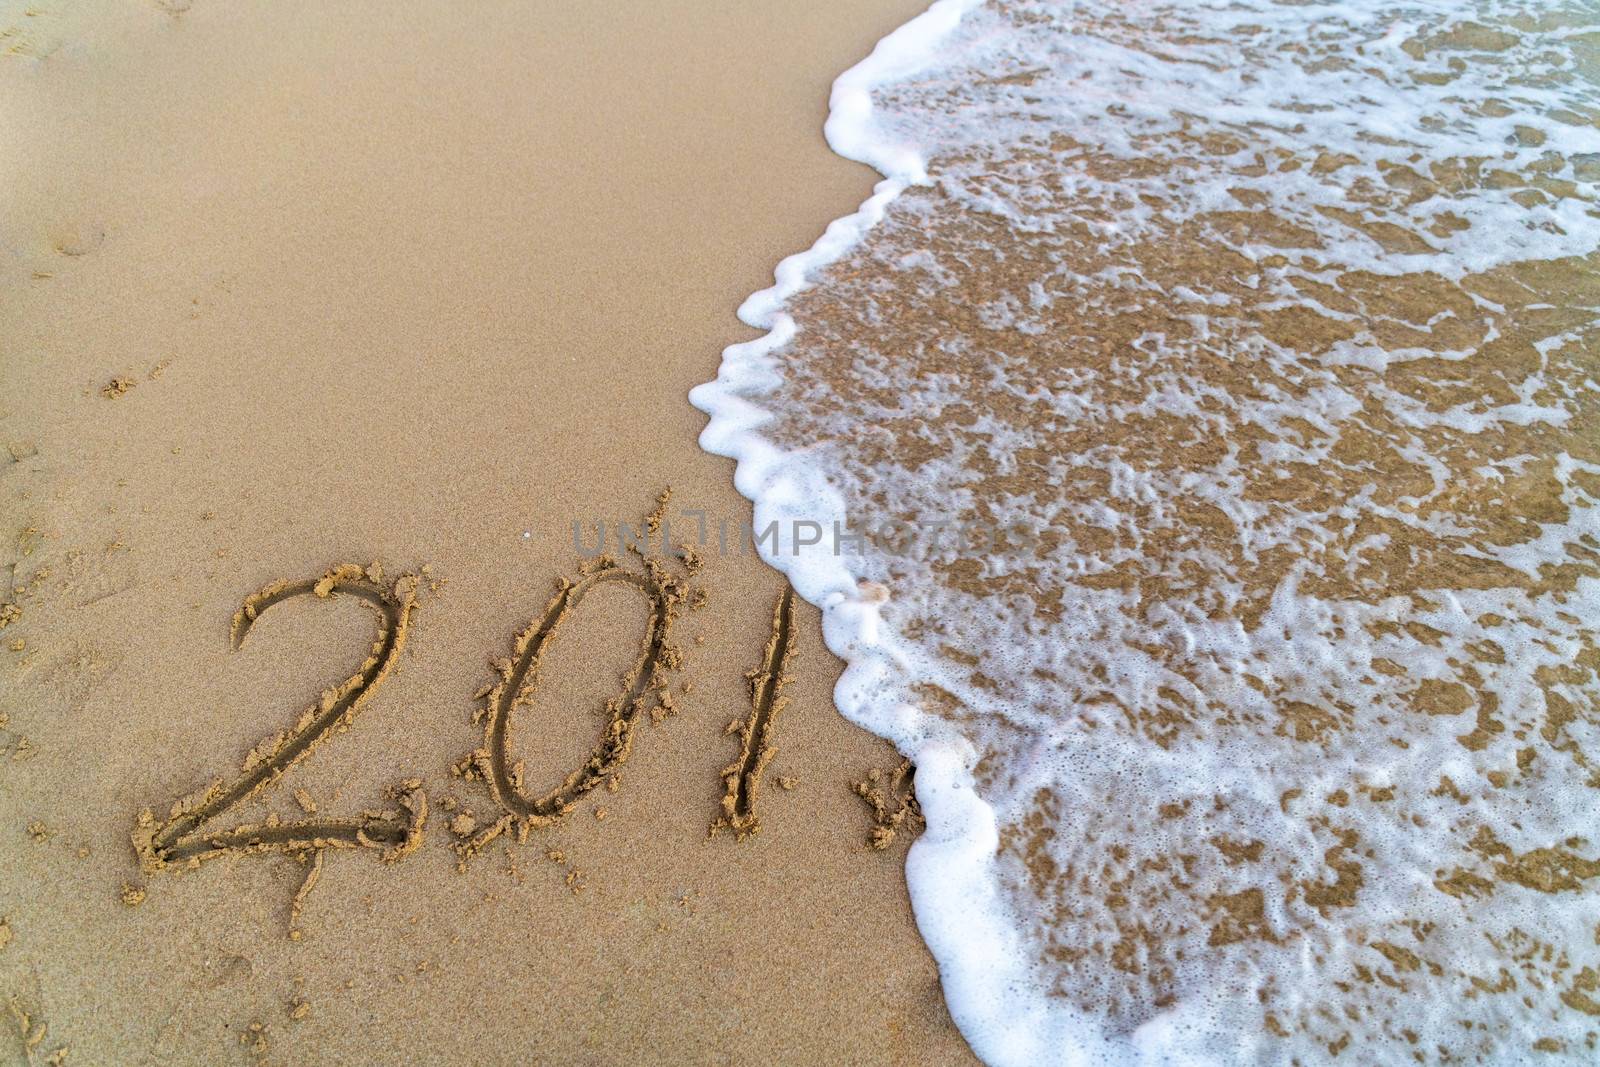 Wave cancelling the 2018 written on the sand by Lordignolo